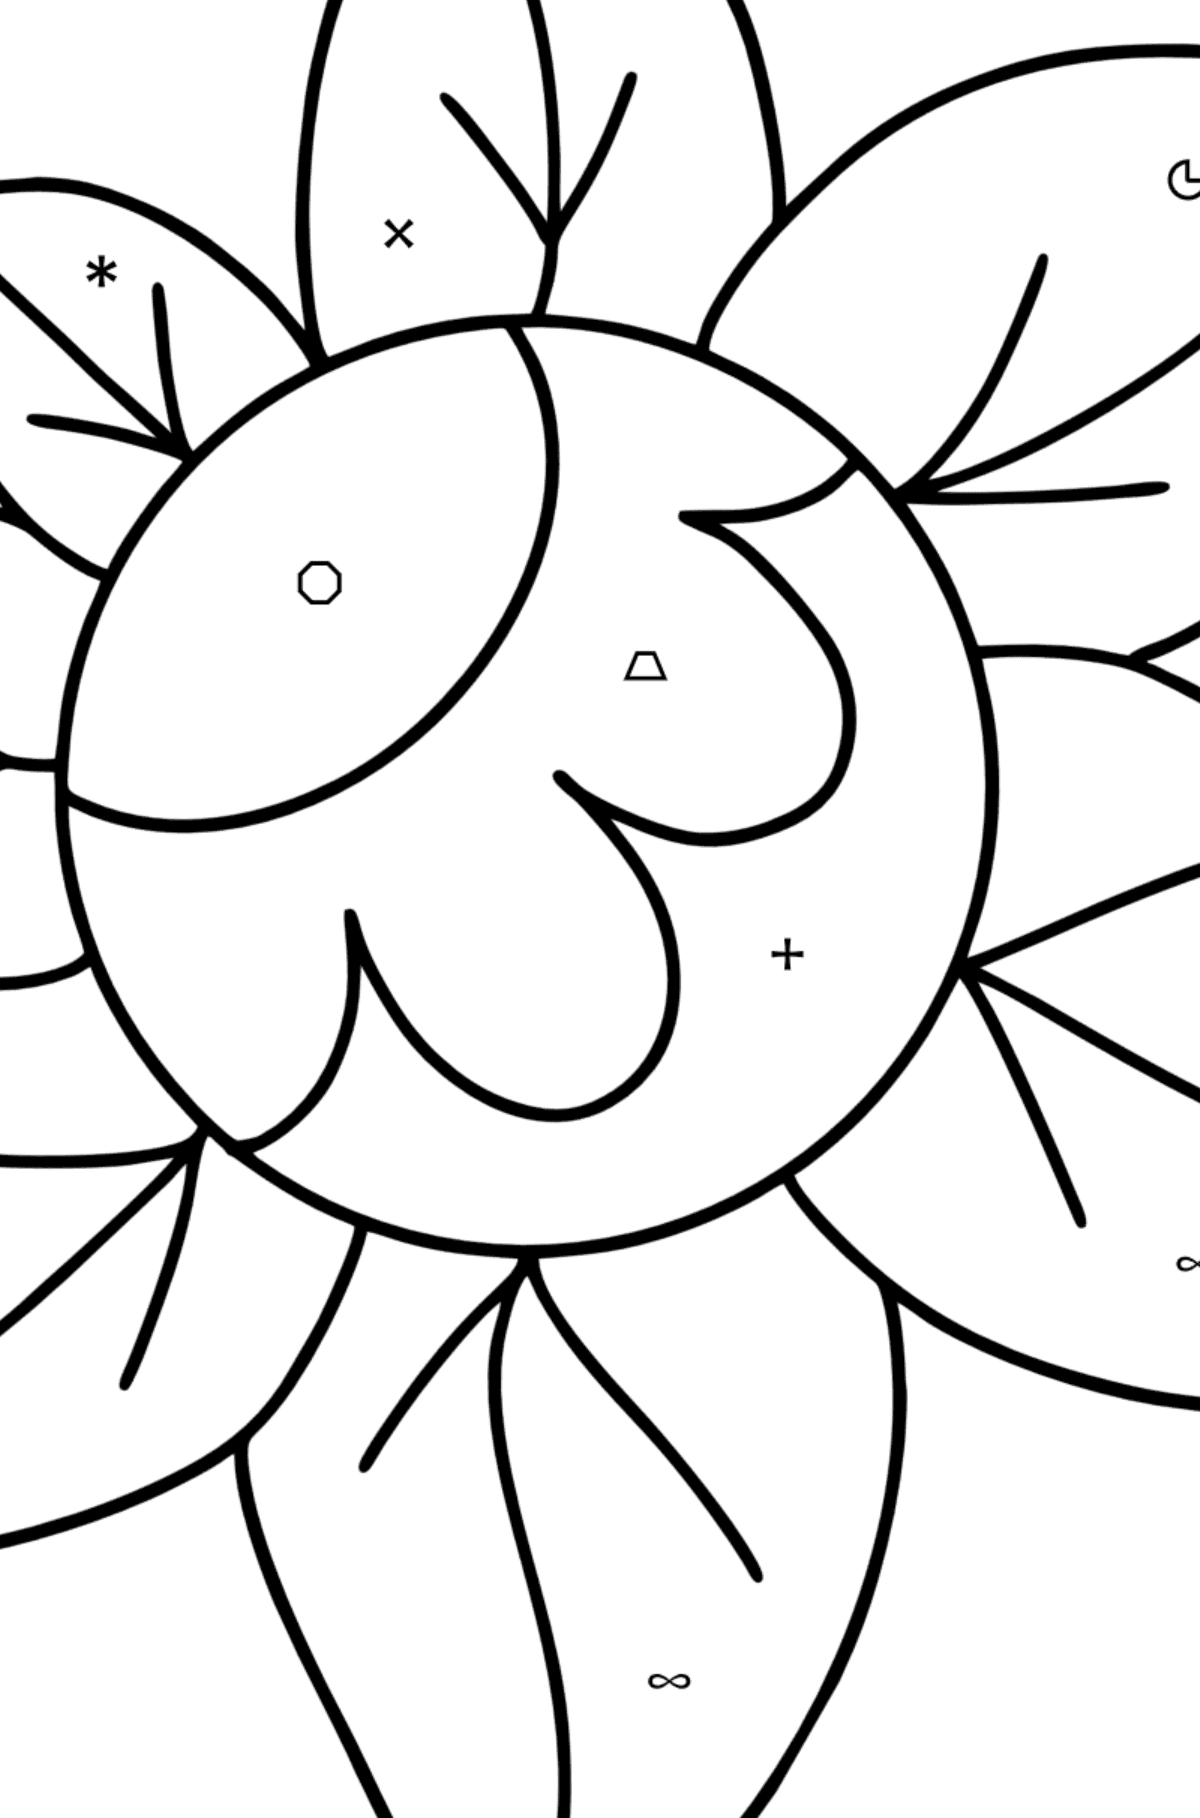 Zentangle Art flower coloring page - Coloring by Symbols and Geometric Shapes for Kids